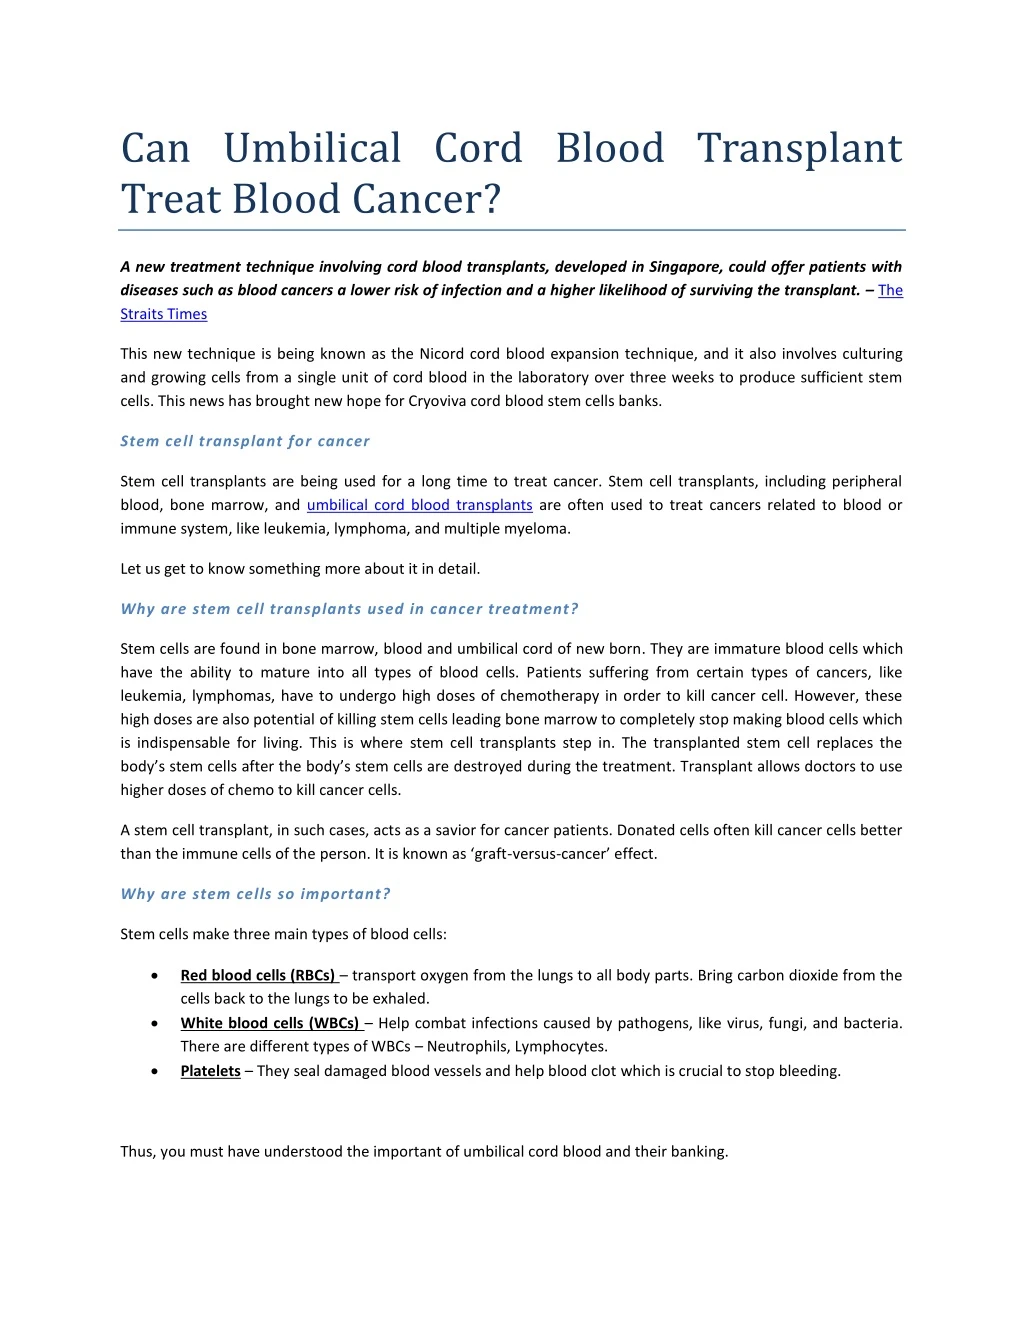 can umbilical cord blood transplant treat blood